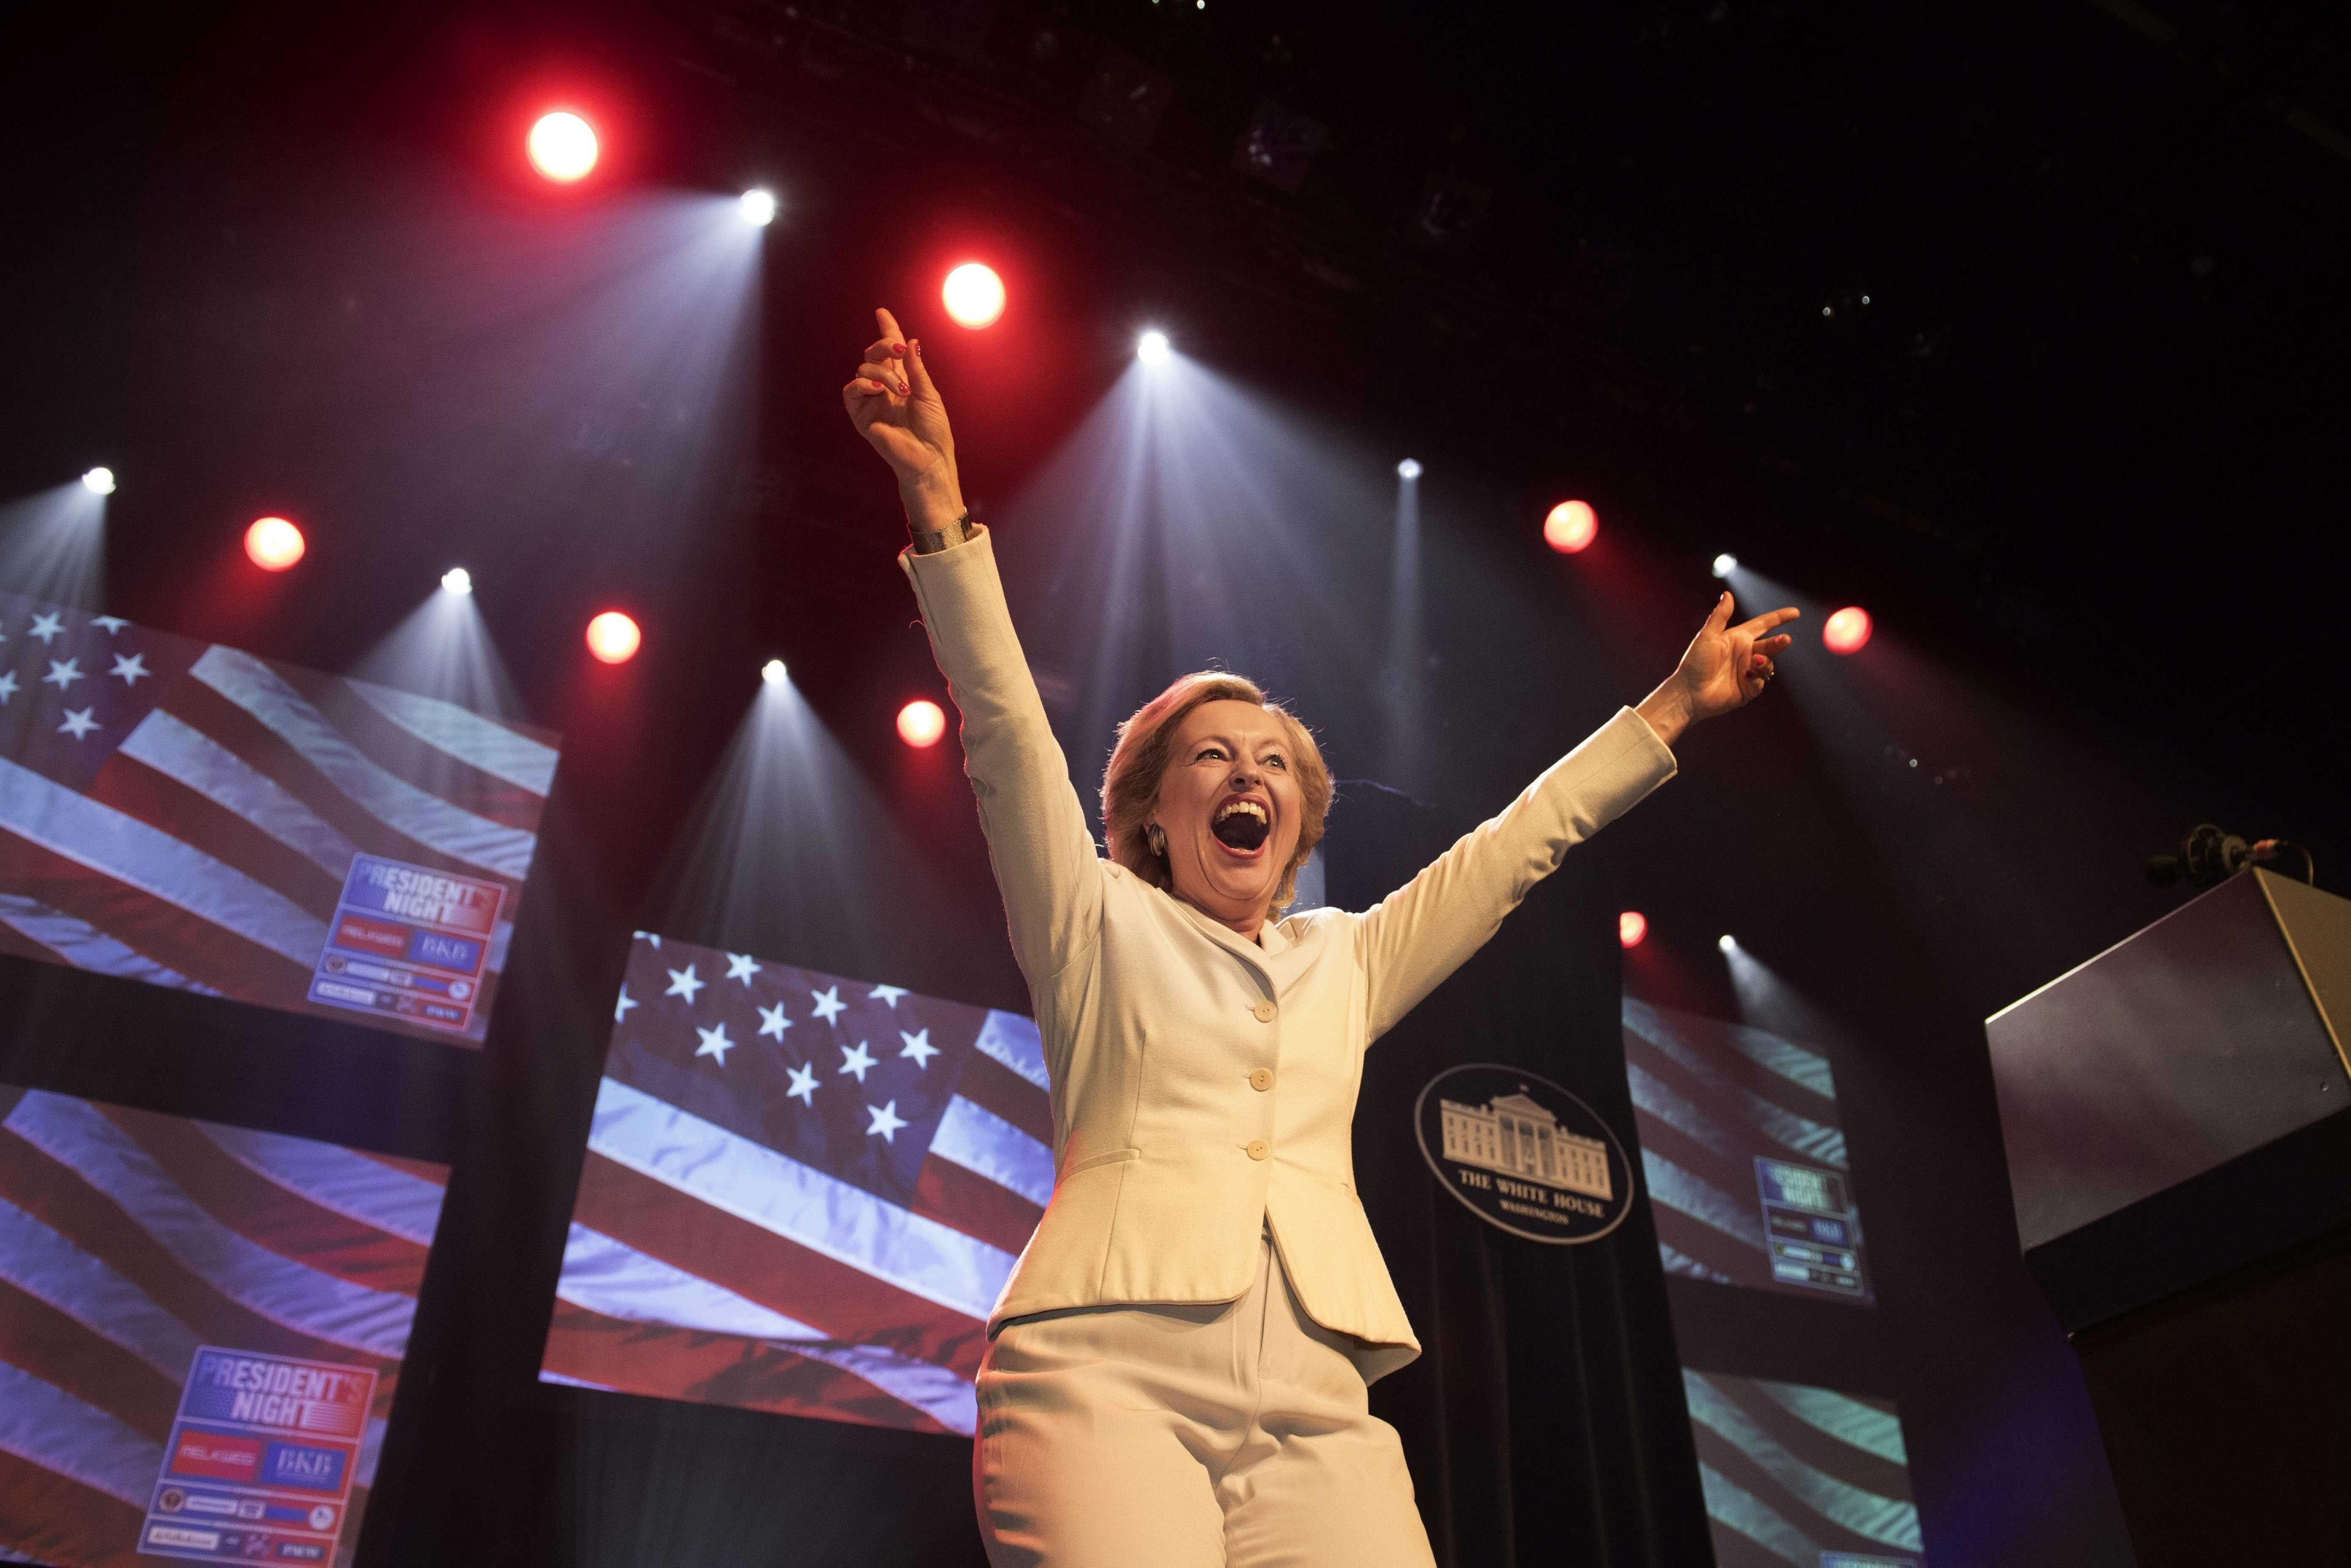 Dutch minster of culture Jet Bussemaker dressed as Hillary Clinton at the President's Night in Amsterdam.